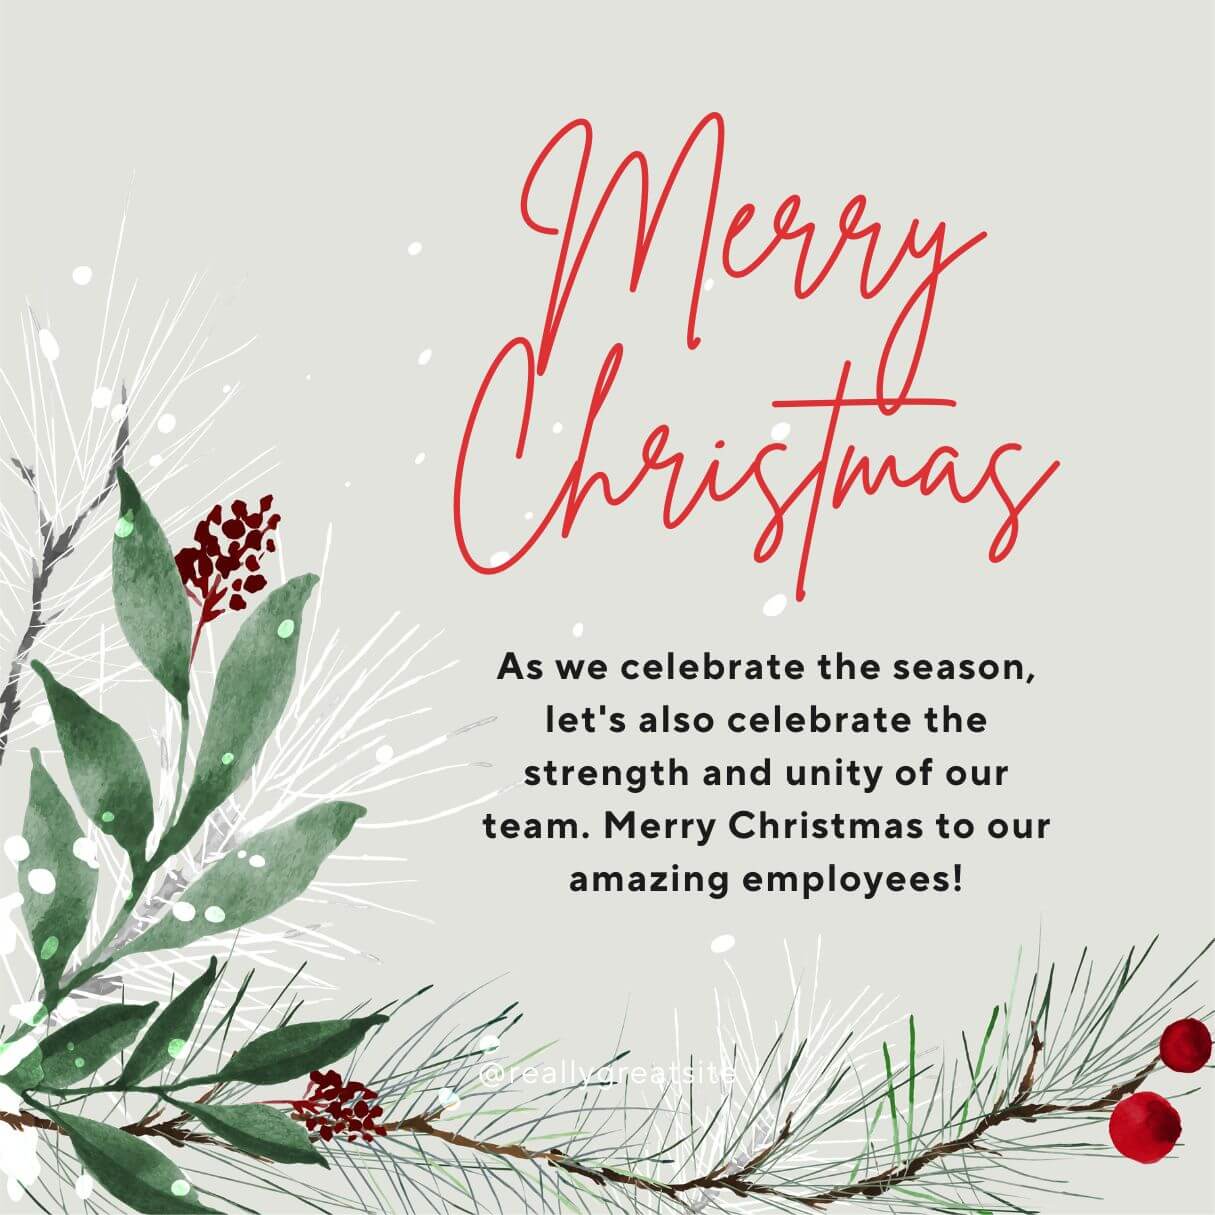 Merry Christmas Eve Wishes For Team And Employees